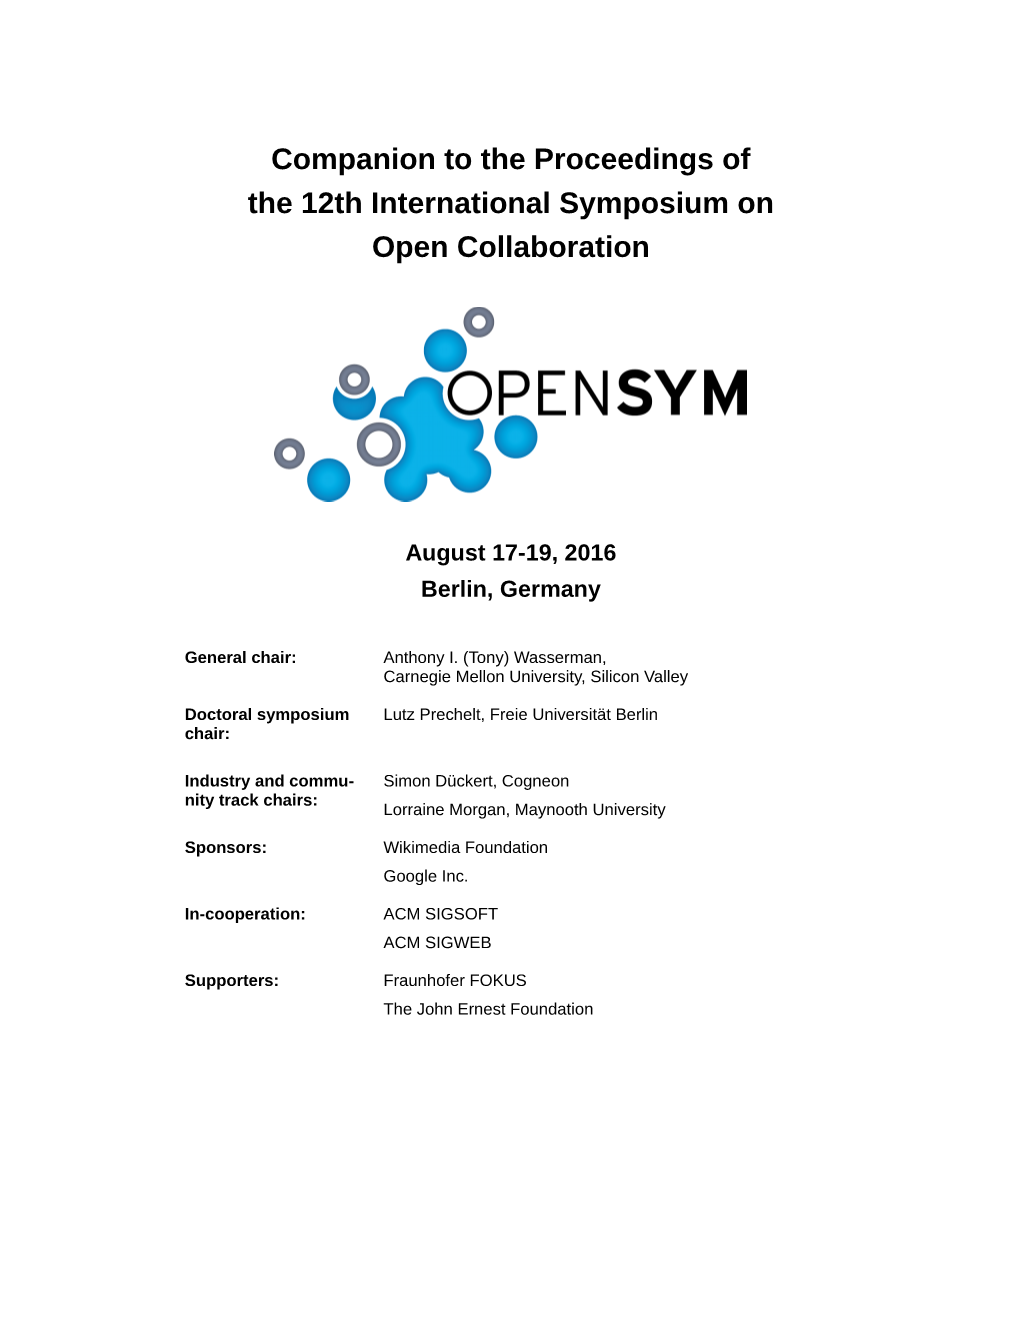 Companion to the Proceedings of the 12Th International Symposium on Open Collaboration